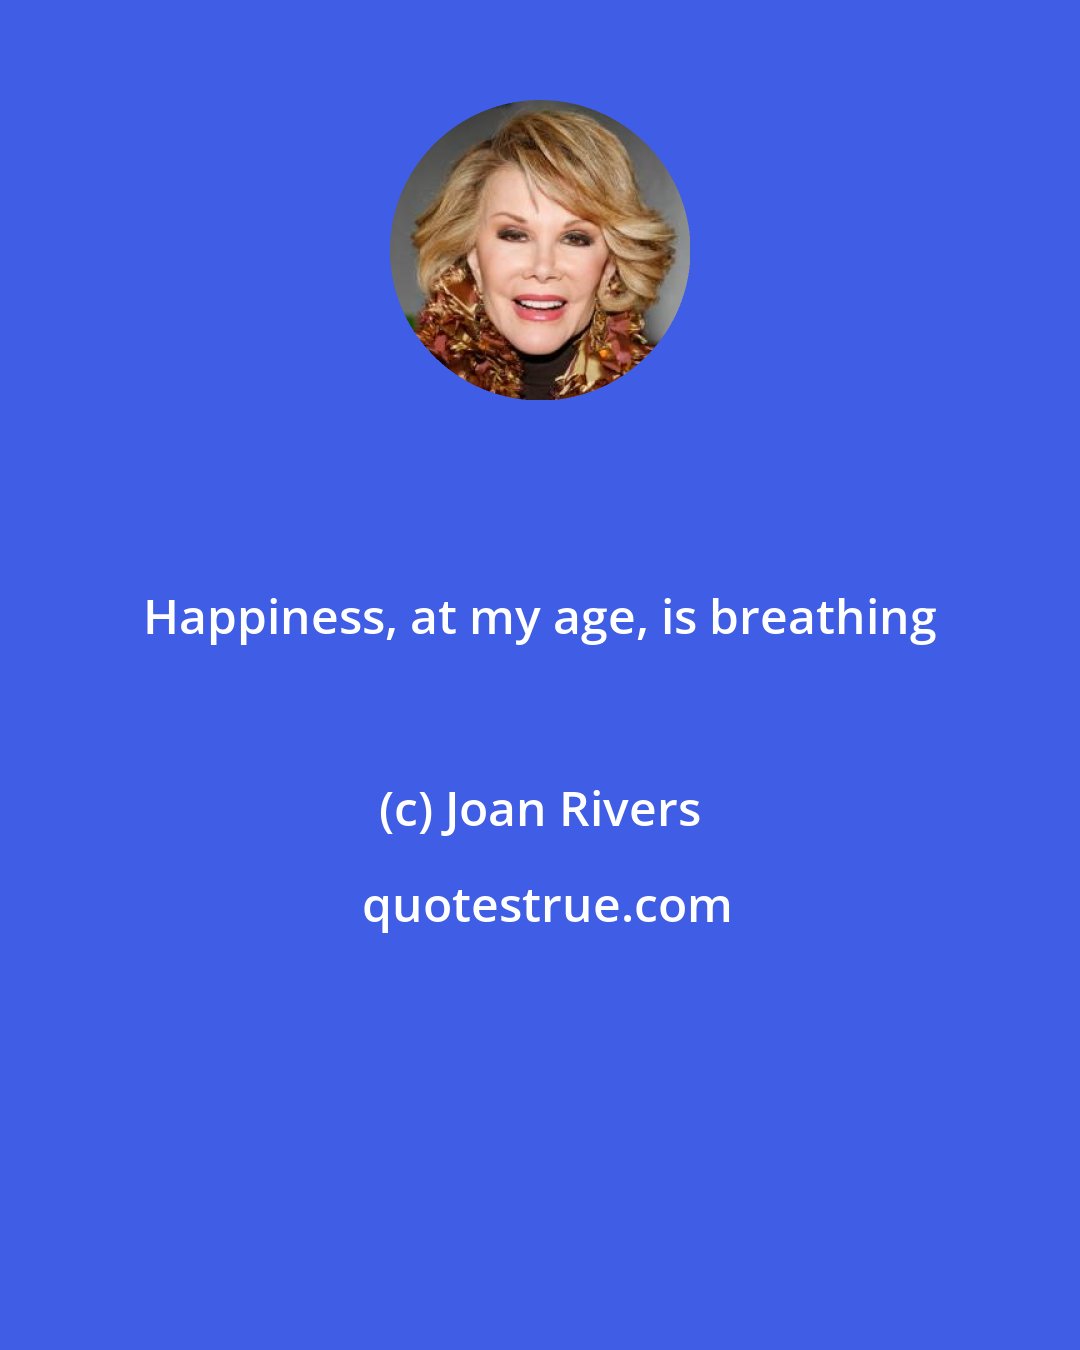 Joan Rivers: Happiness, at my age, is breathing